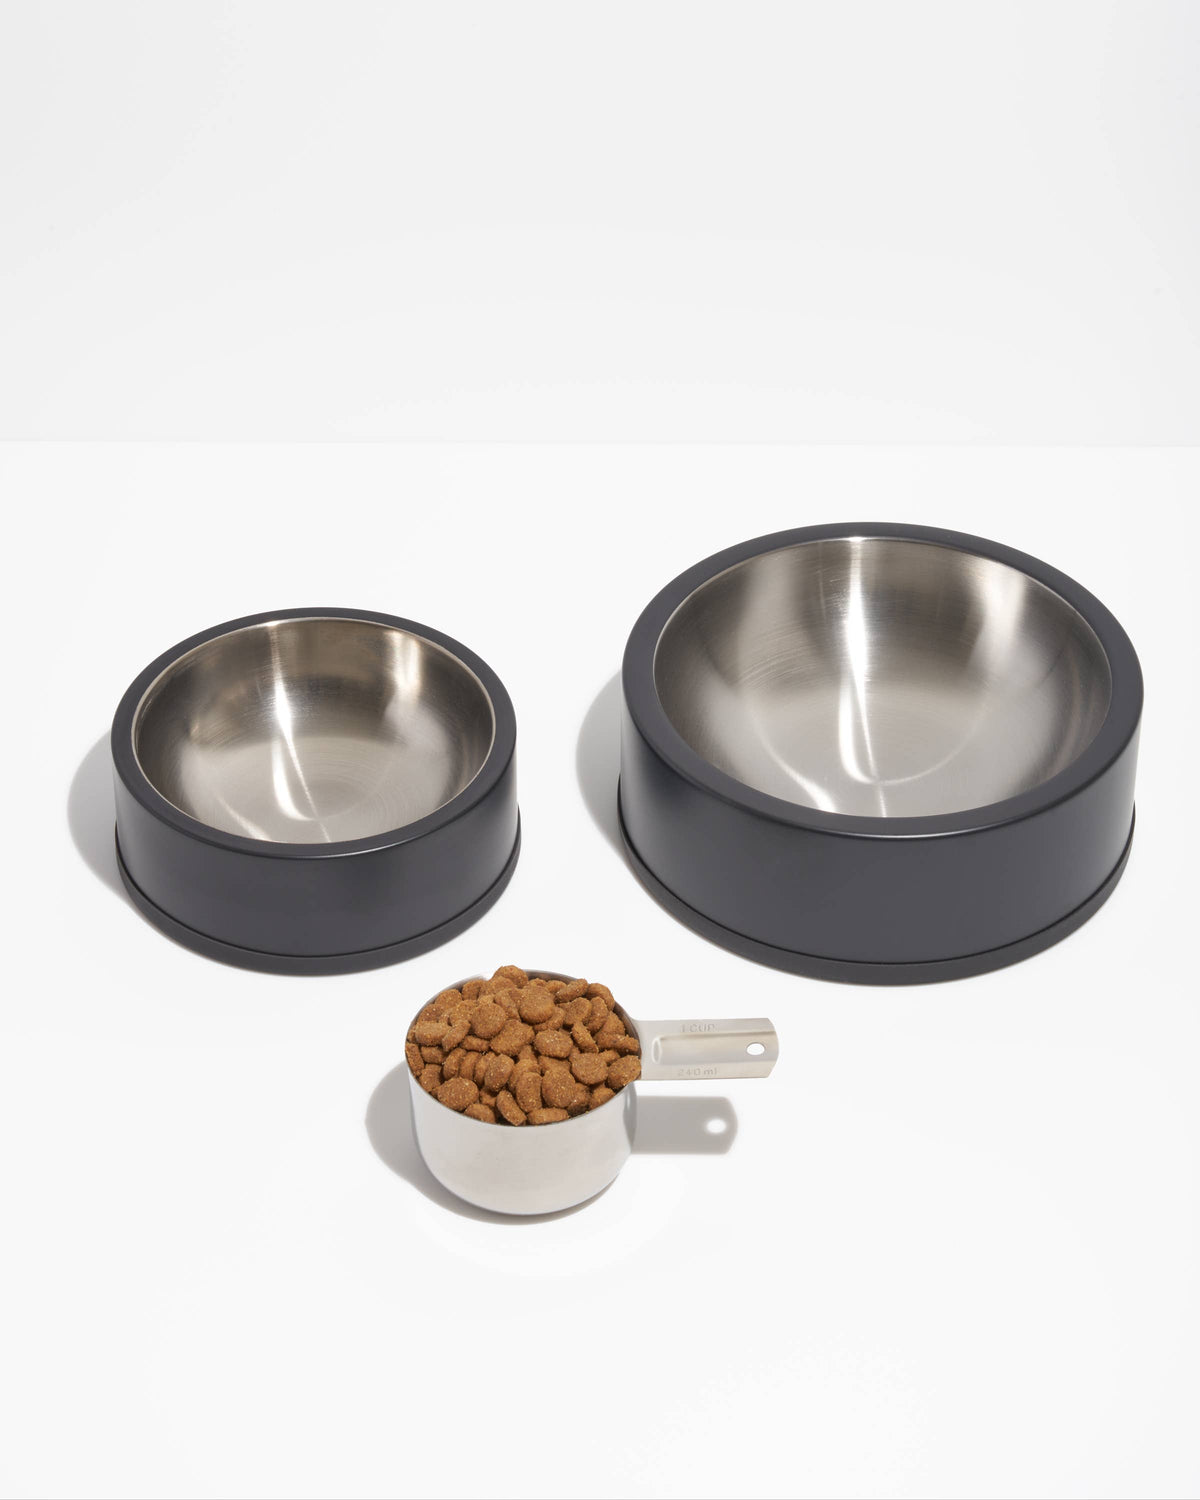 Non-Skid Stainless Steel Pet Bowl